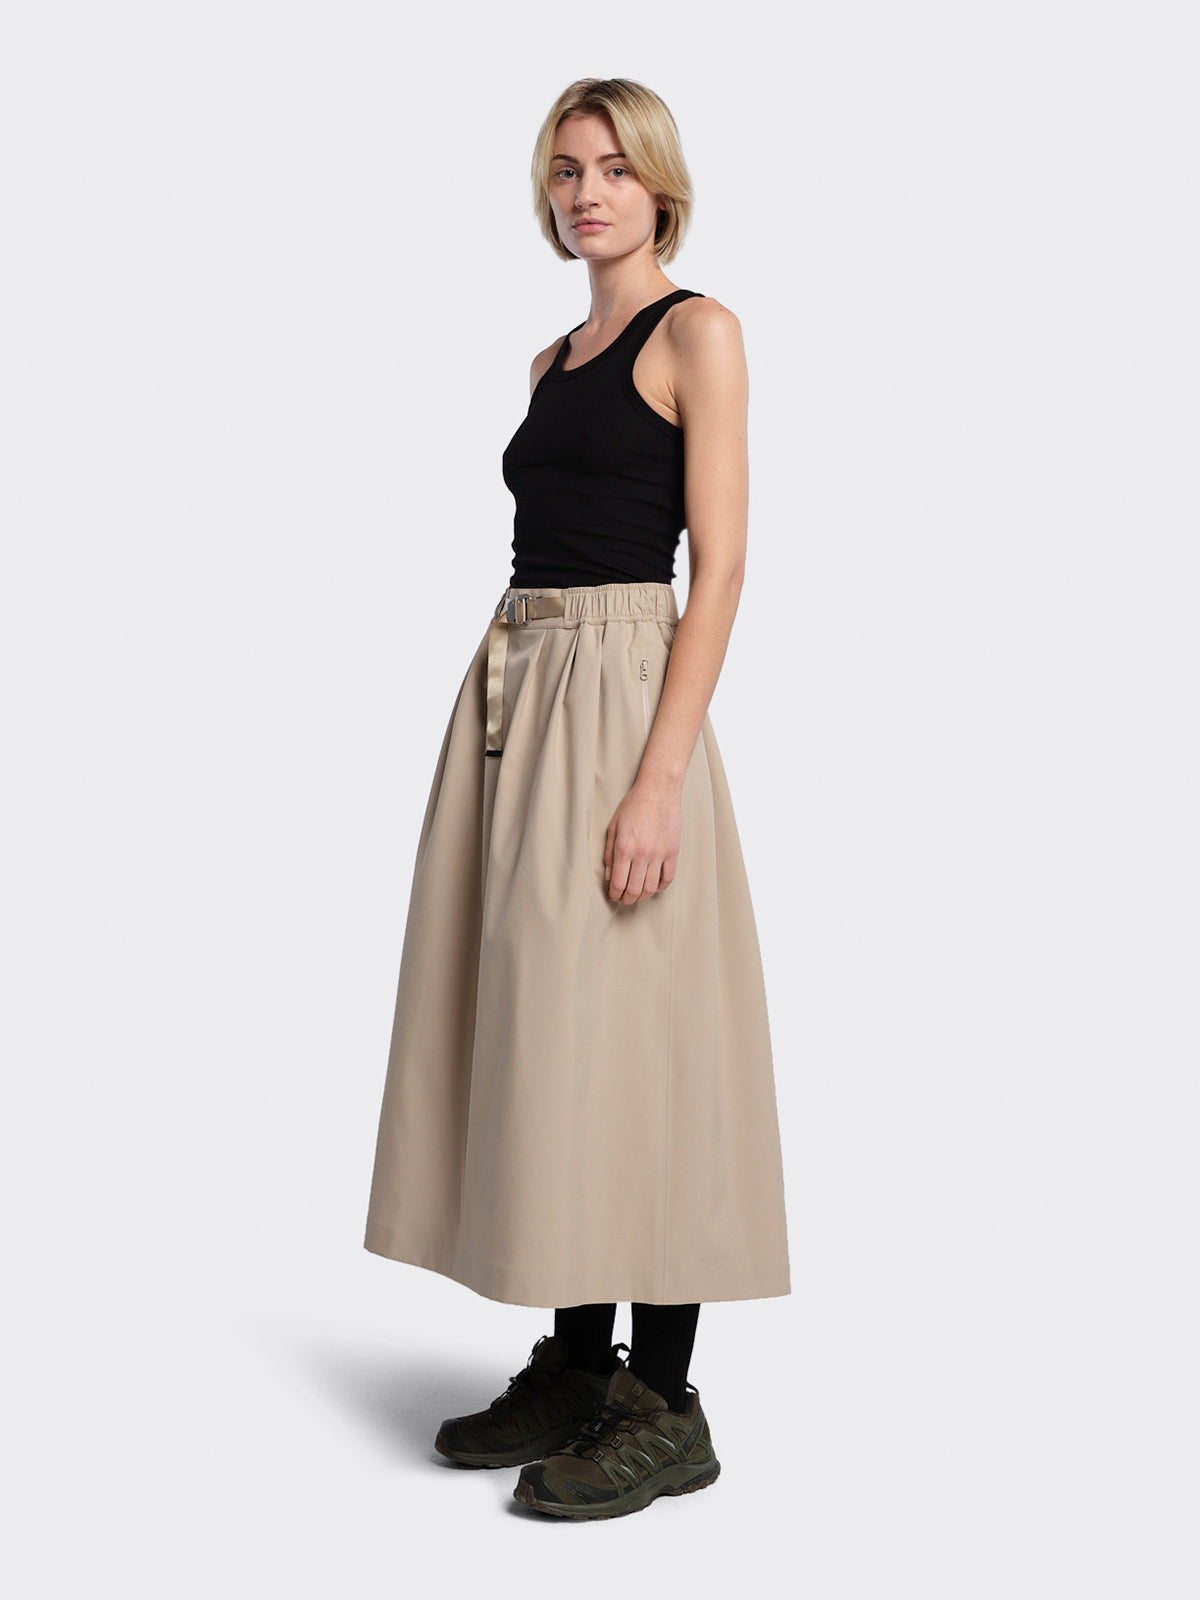 Woman dressed in Hildre skirt from Blæst in Beige